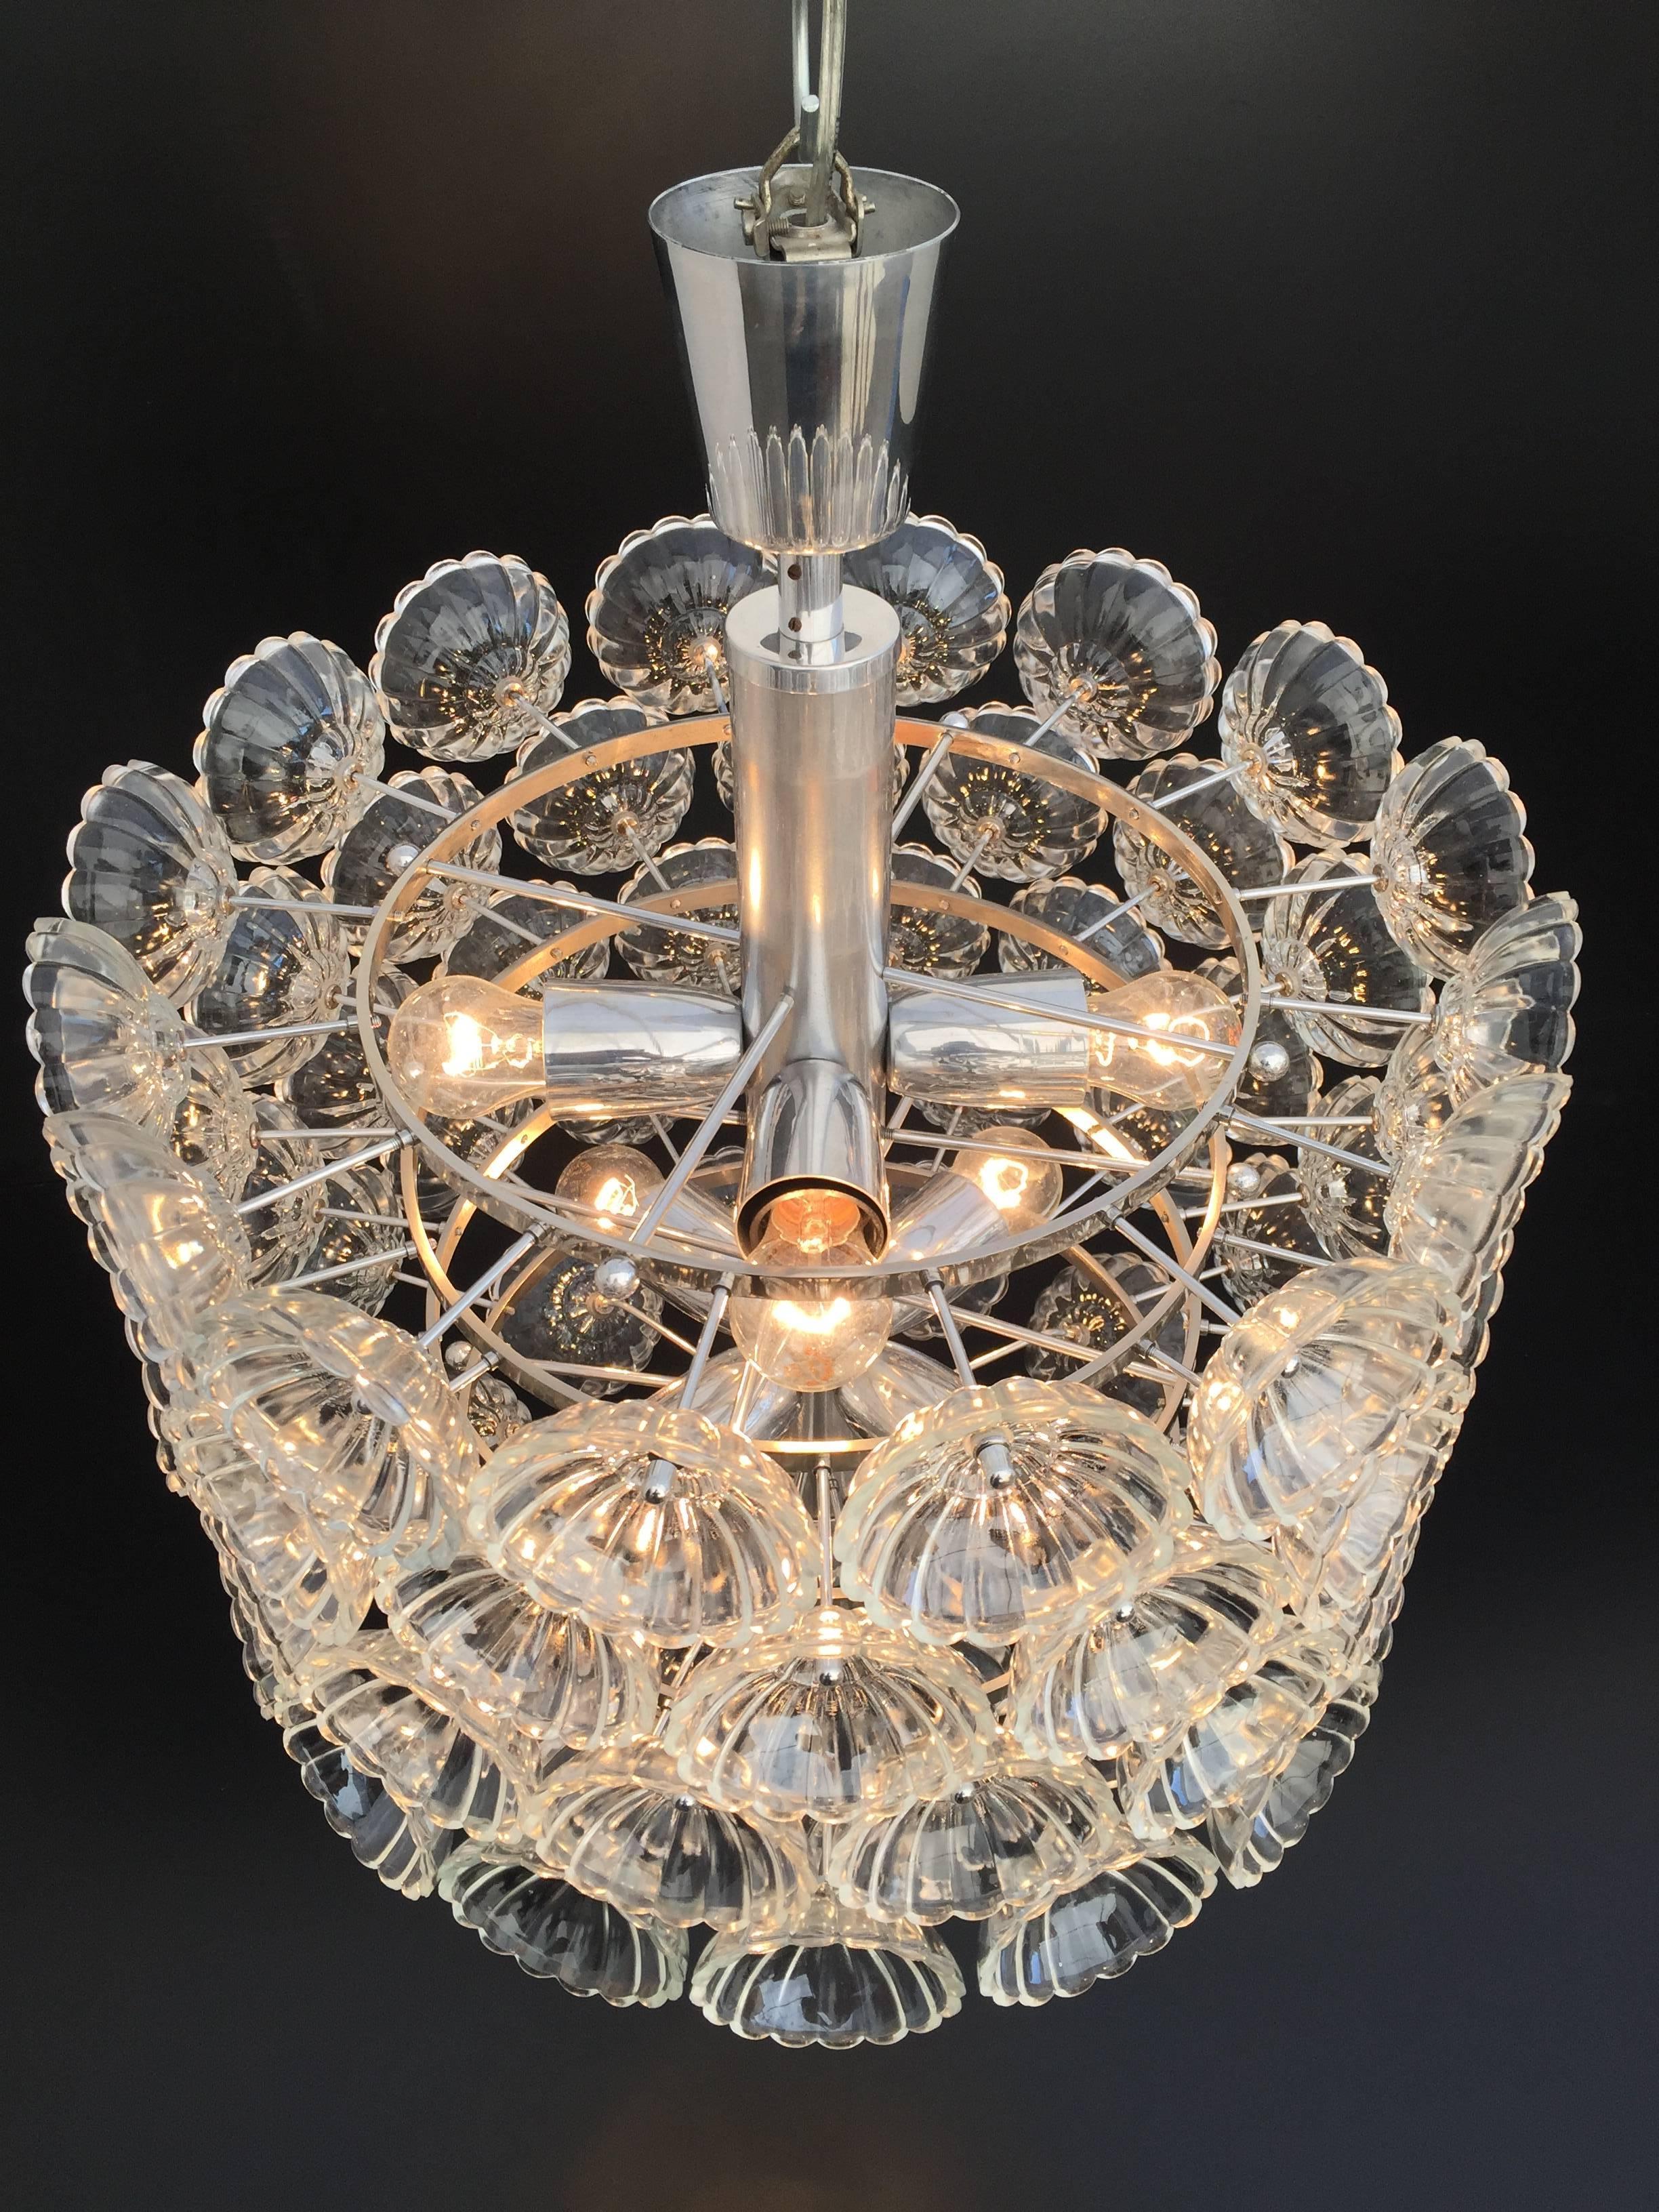 Floral glass Pusteblume (blowball) chandelier in cylindrical shape.
It uses eight E27 base bulbs up to 60 watts 